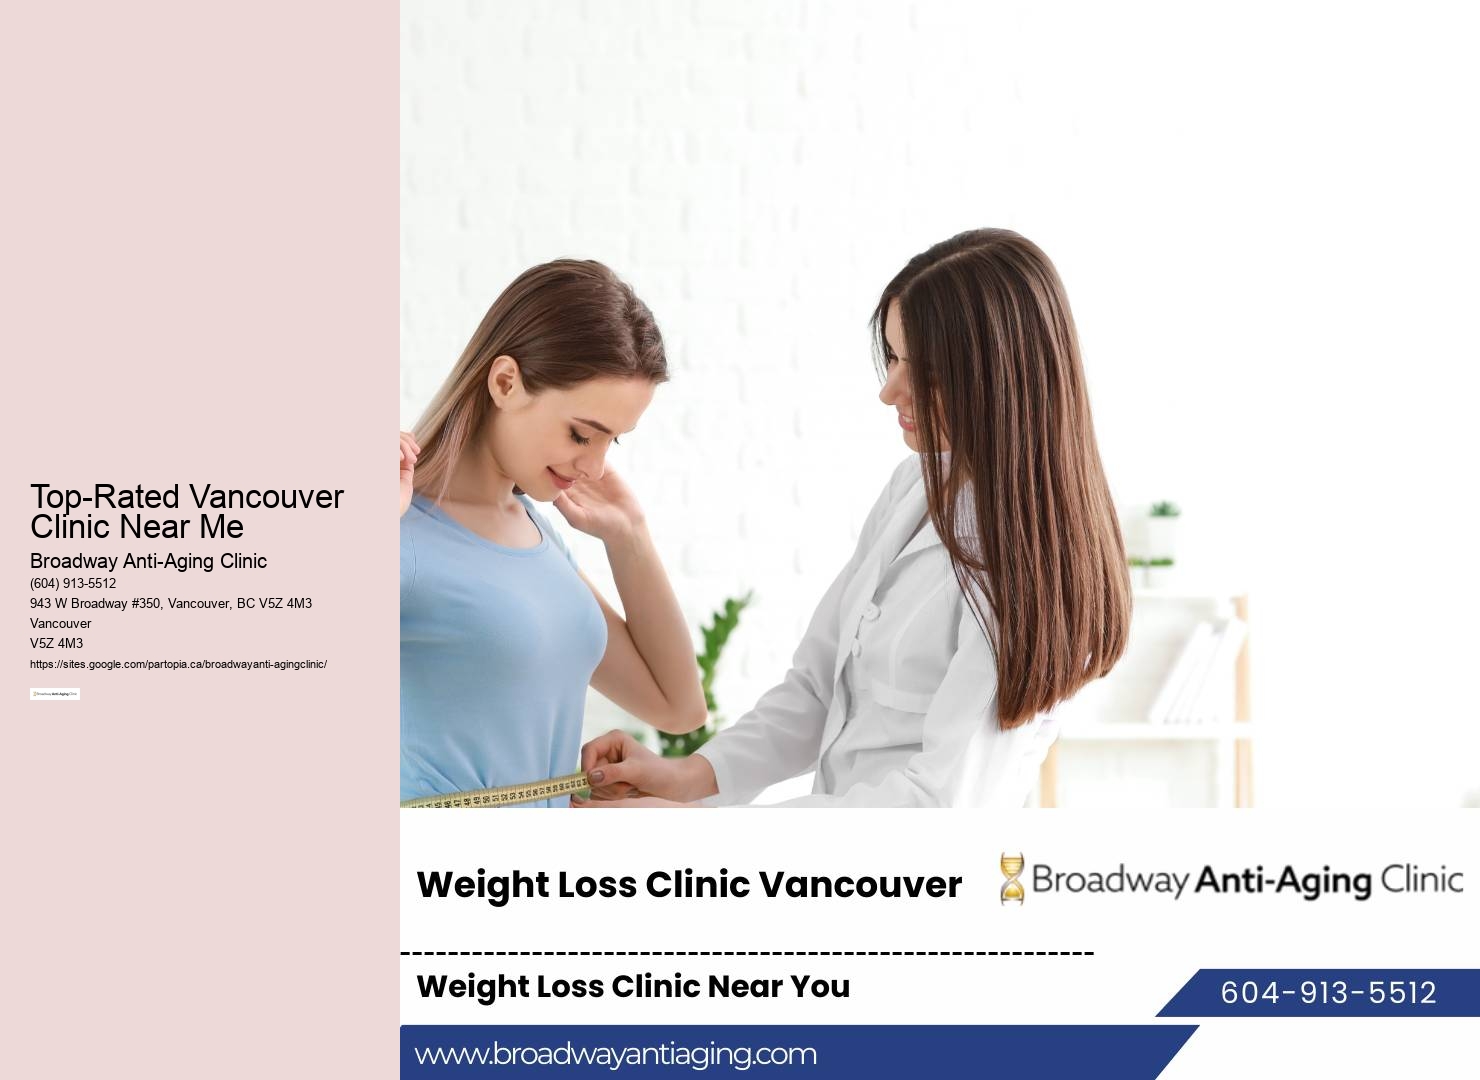 Top-Rated Vancouver Clinic Near Me